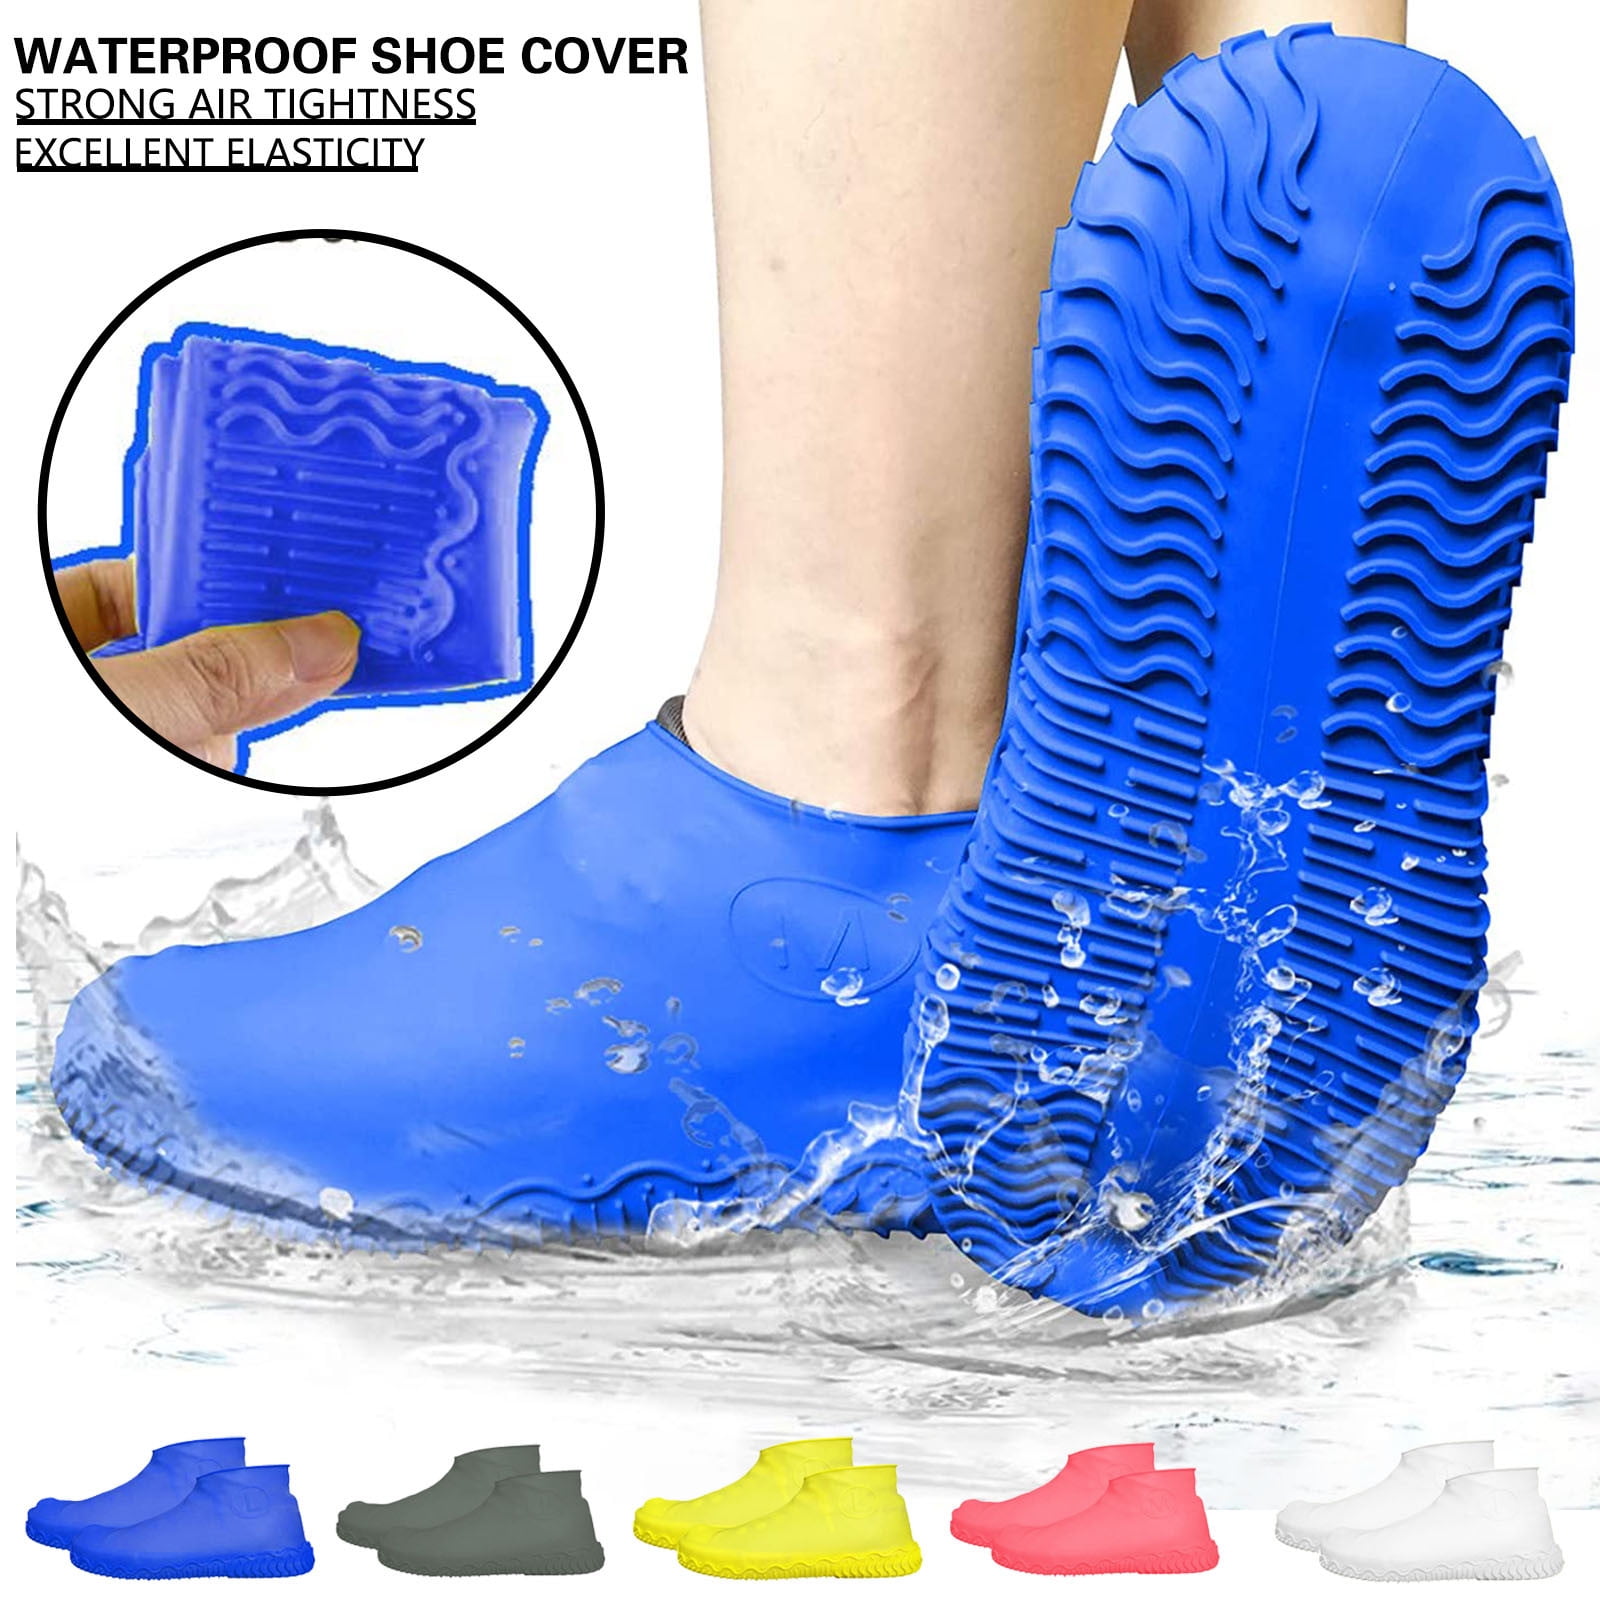 Reusable Waterproof Shoe Covers Rain Boots Anti-slip Shoes Cycling Overshoes US 